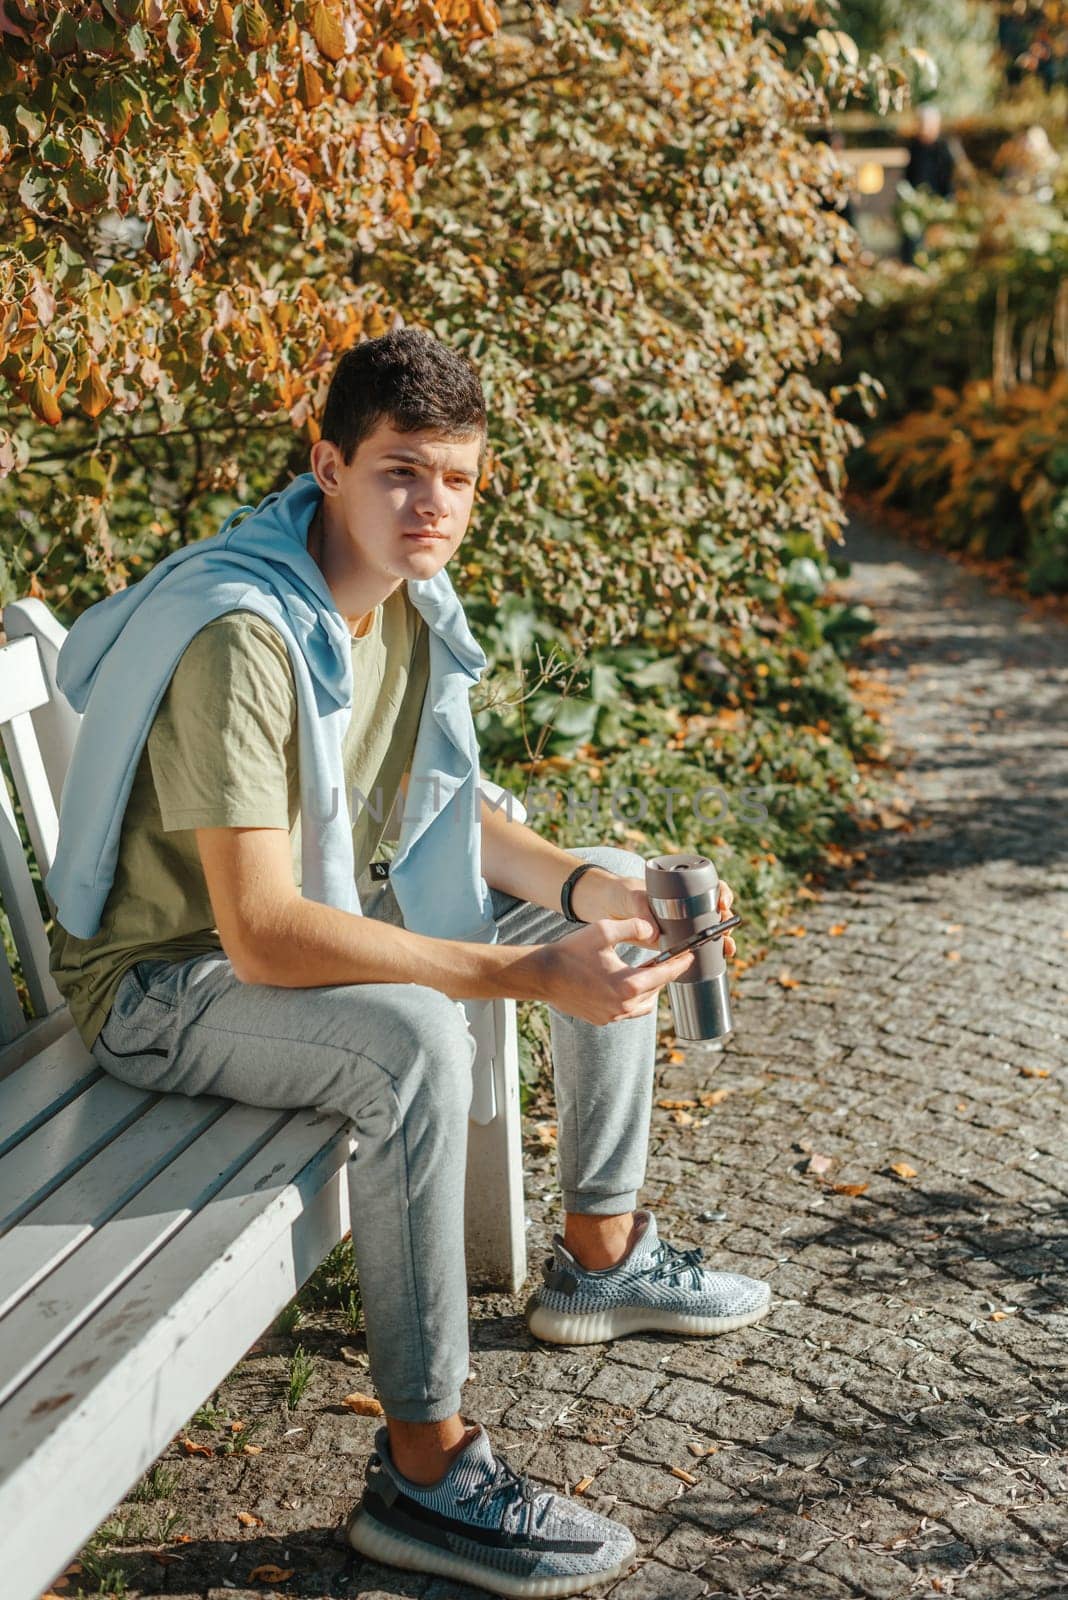 A Teenager Sits On A Bench In The Autumn Park Drinks Coffee From A Thermo Mug And Looks Into A Phone. Portrait Of Handsome Cheerful Guy Sitting On Bench Fresh Air Using Device Browsing Media Smm Drinking Latte Urban Outside Outdoor by Andrii_Ko